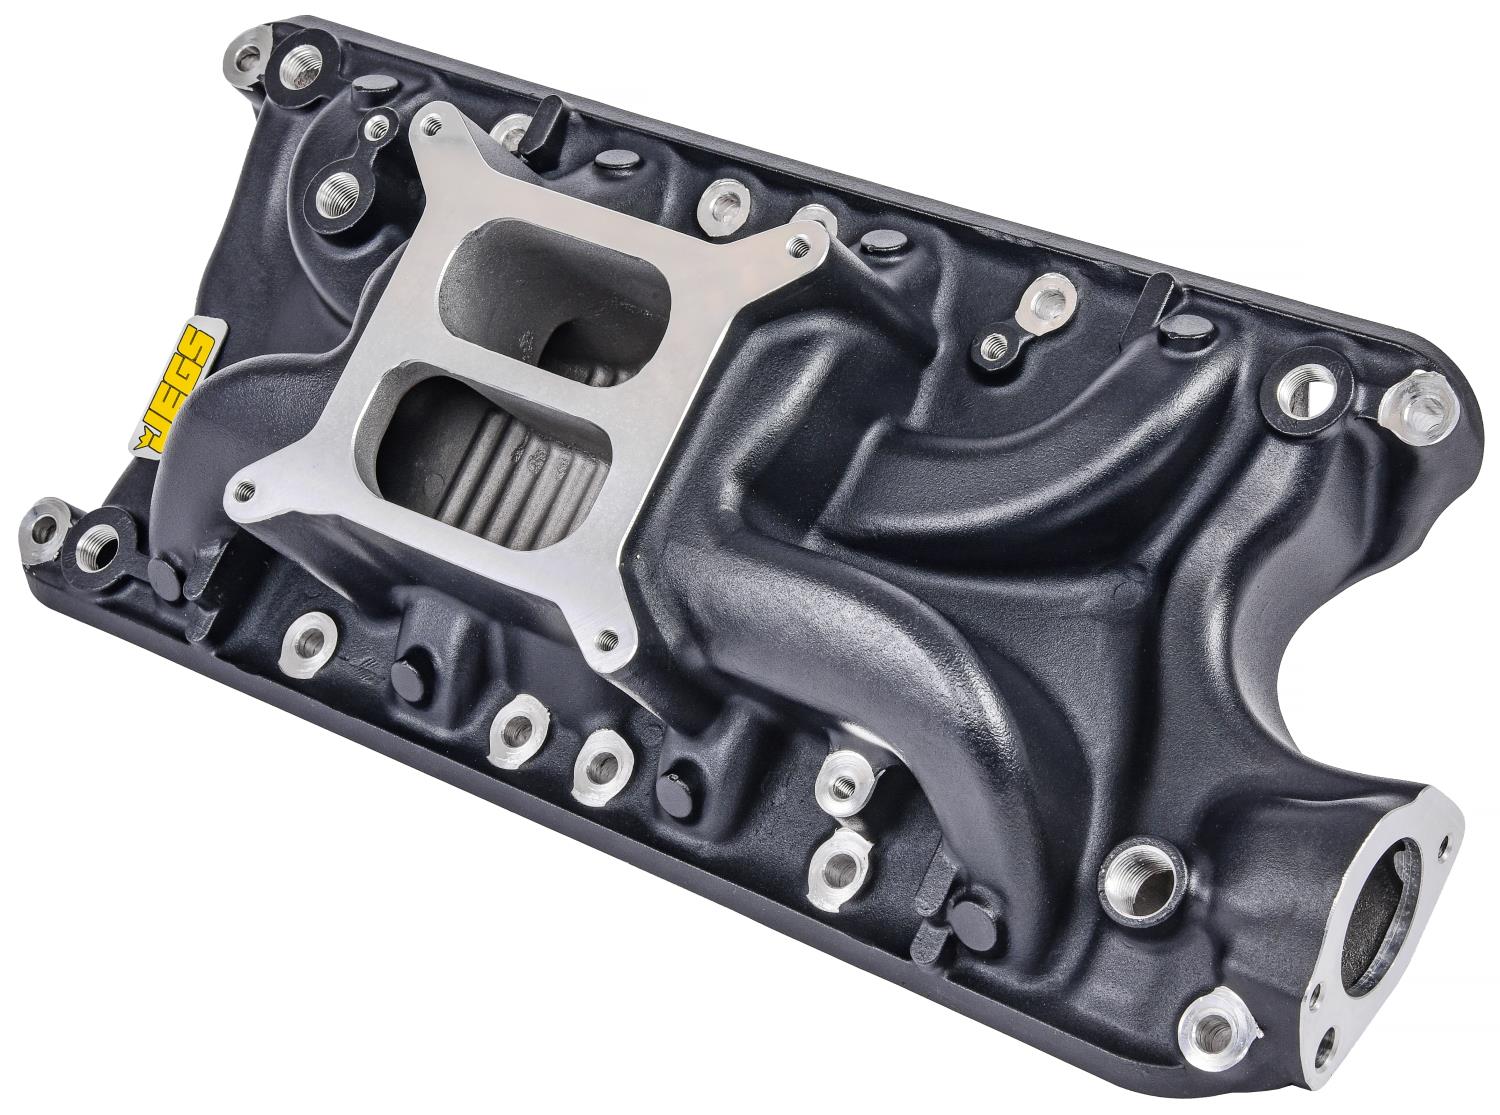 Intake Manifold for 1962-1985 Small Block Ford 260, 289 & 302 (Except Boss 302), Dual Plane [Black]